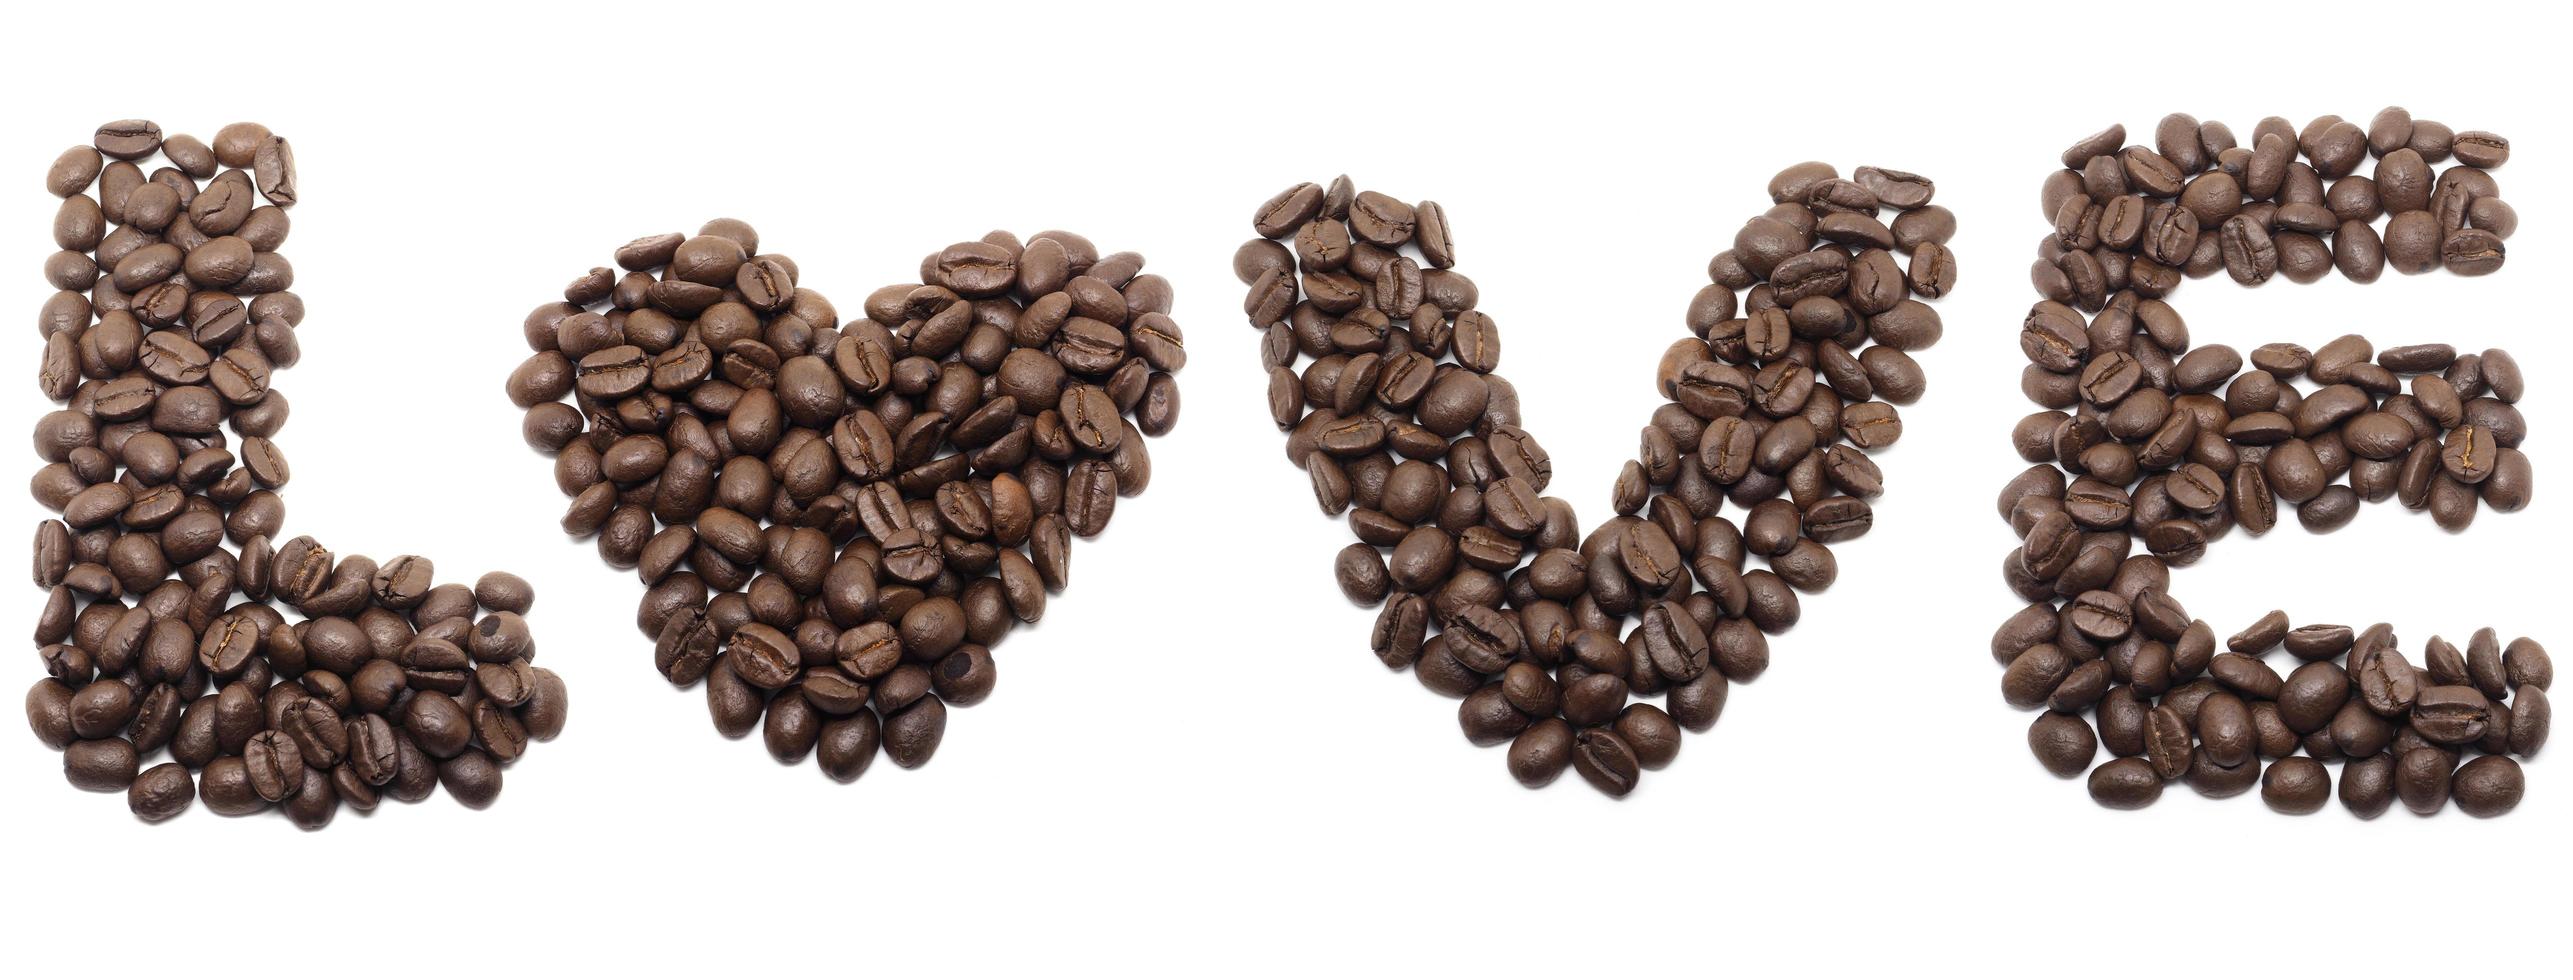 Coffee seed love group on white isolated,Fresh coffee seed lover photo